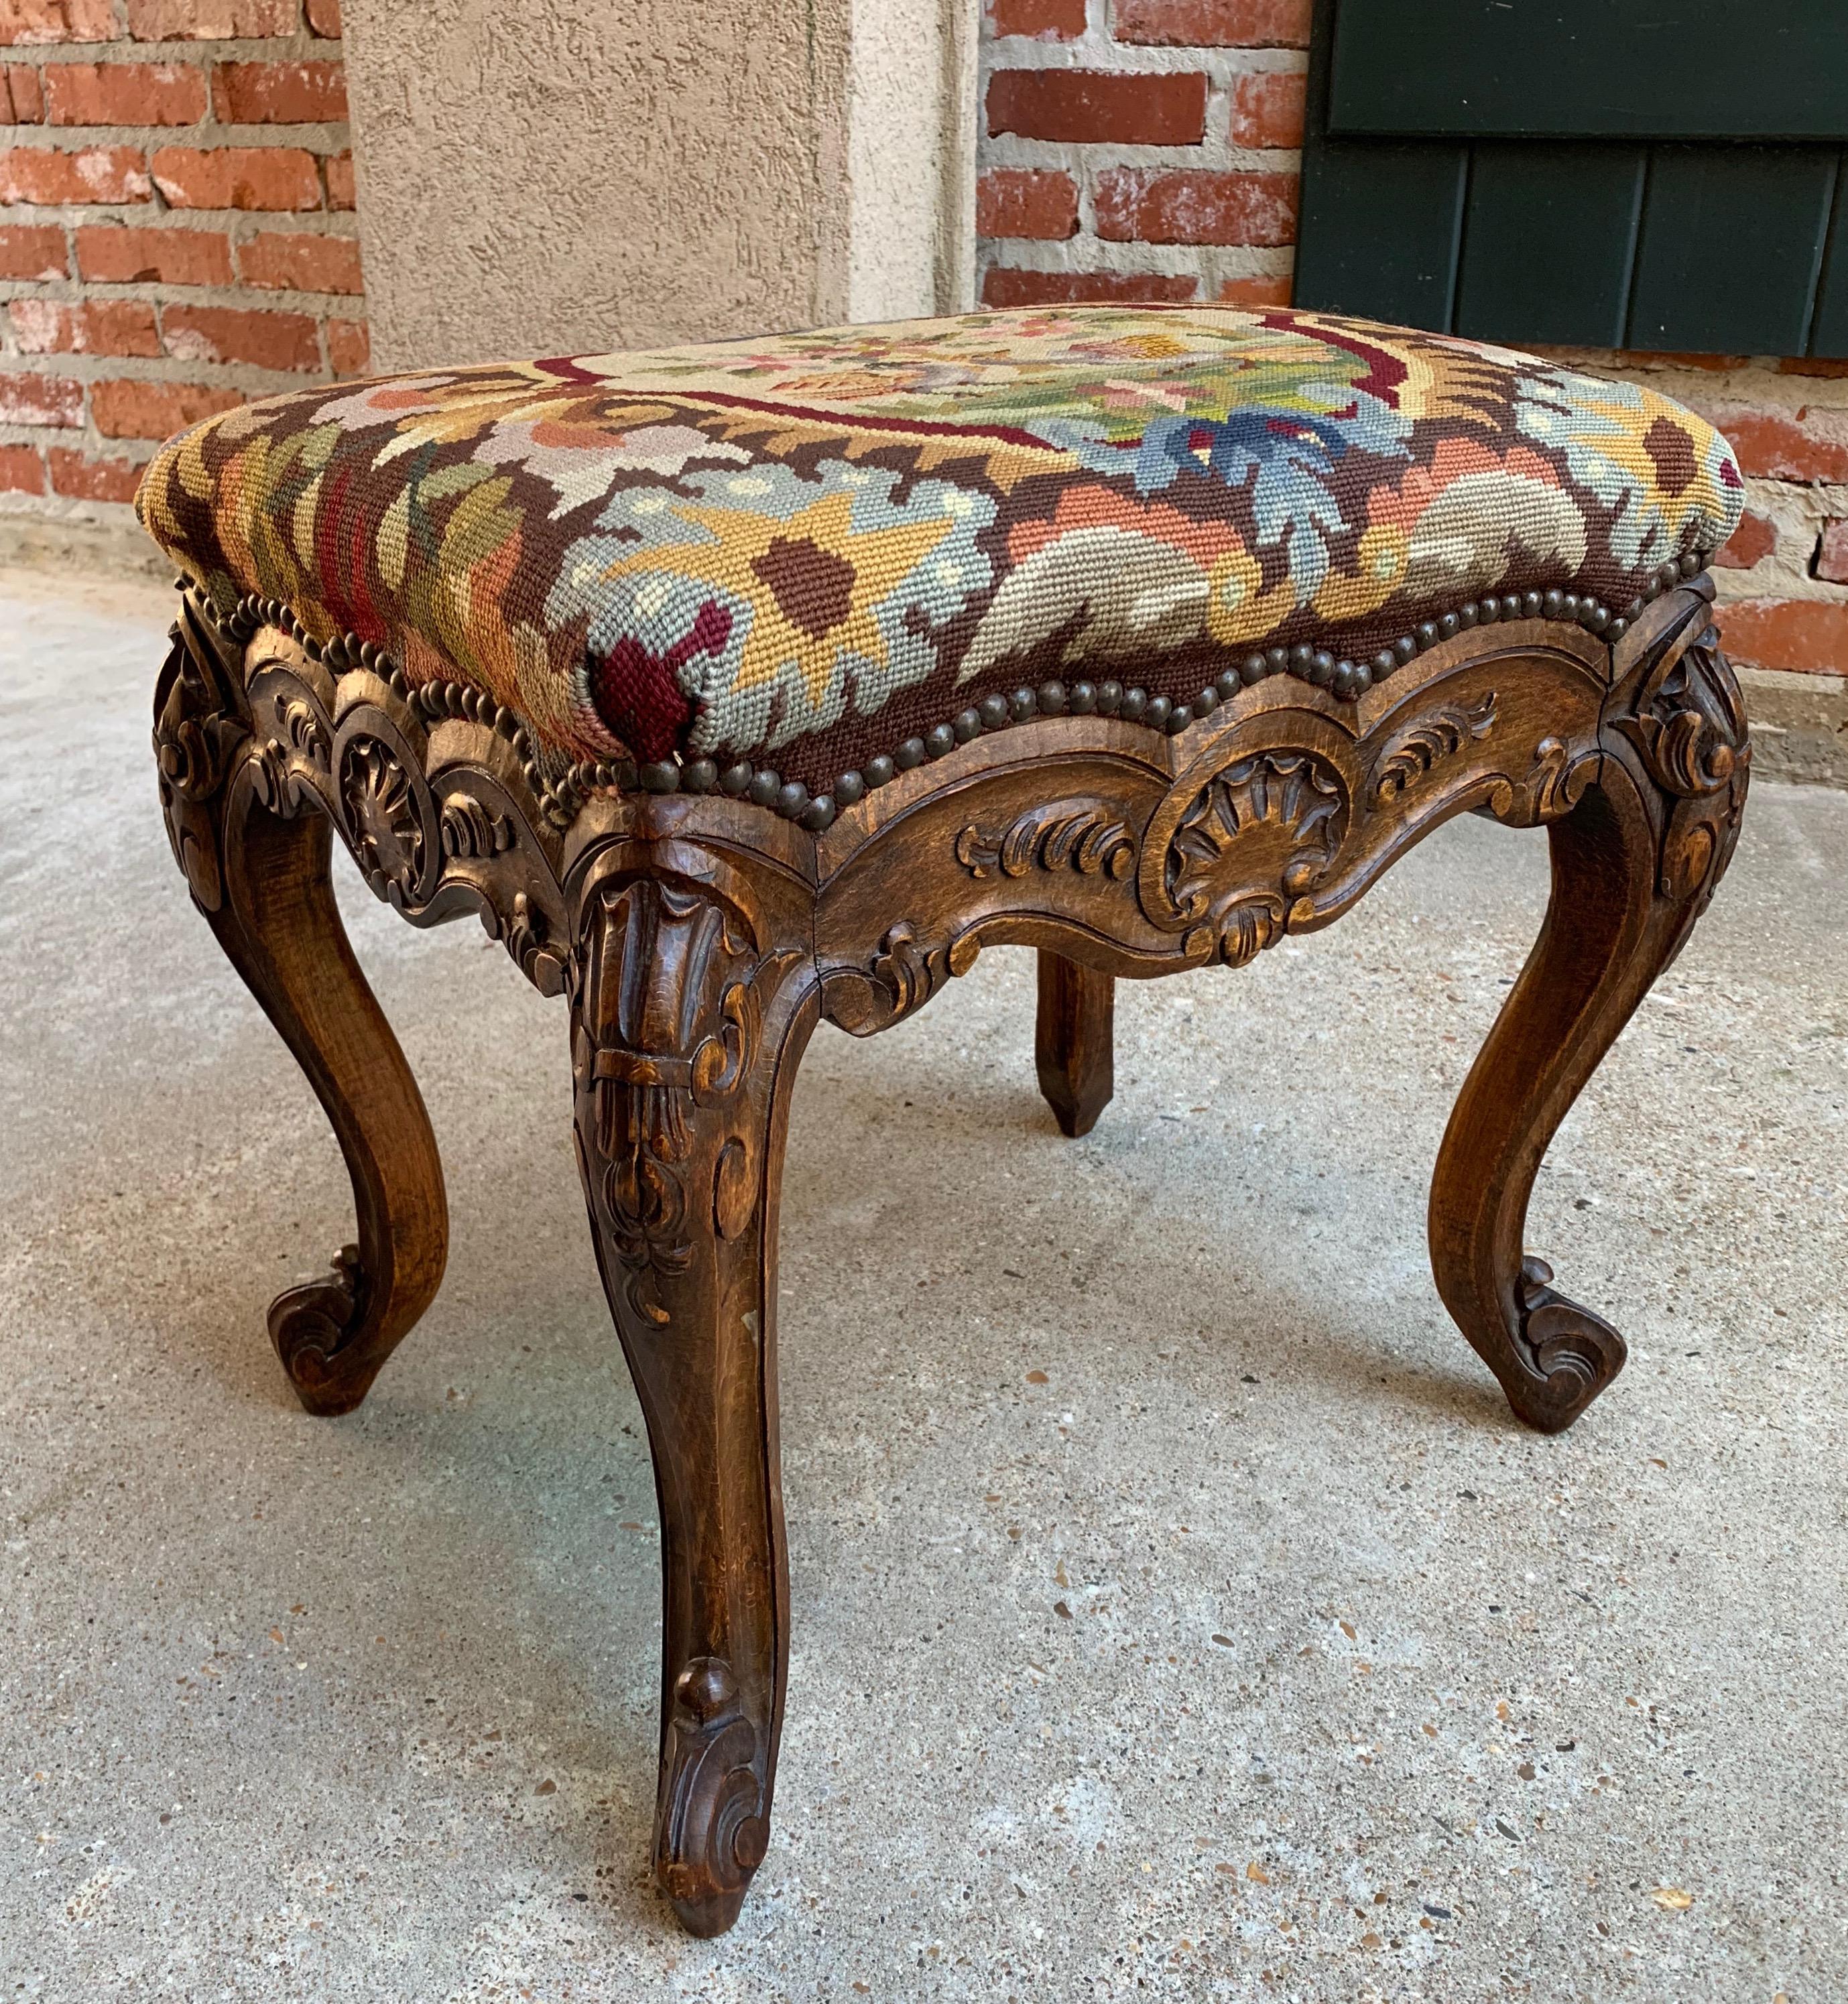 Direct from France, one of several great antique stools, tabourets, and benches from our most recent container!
~ Fabulous French Louis XV style with cabriole legs and hand carved apron on all sides.
~ Lovely French upholstery, with large brass